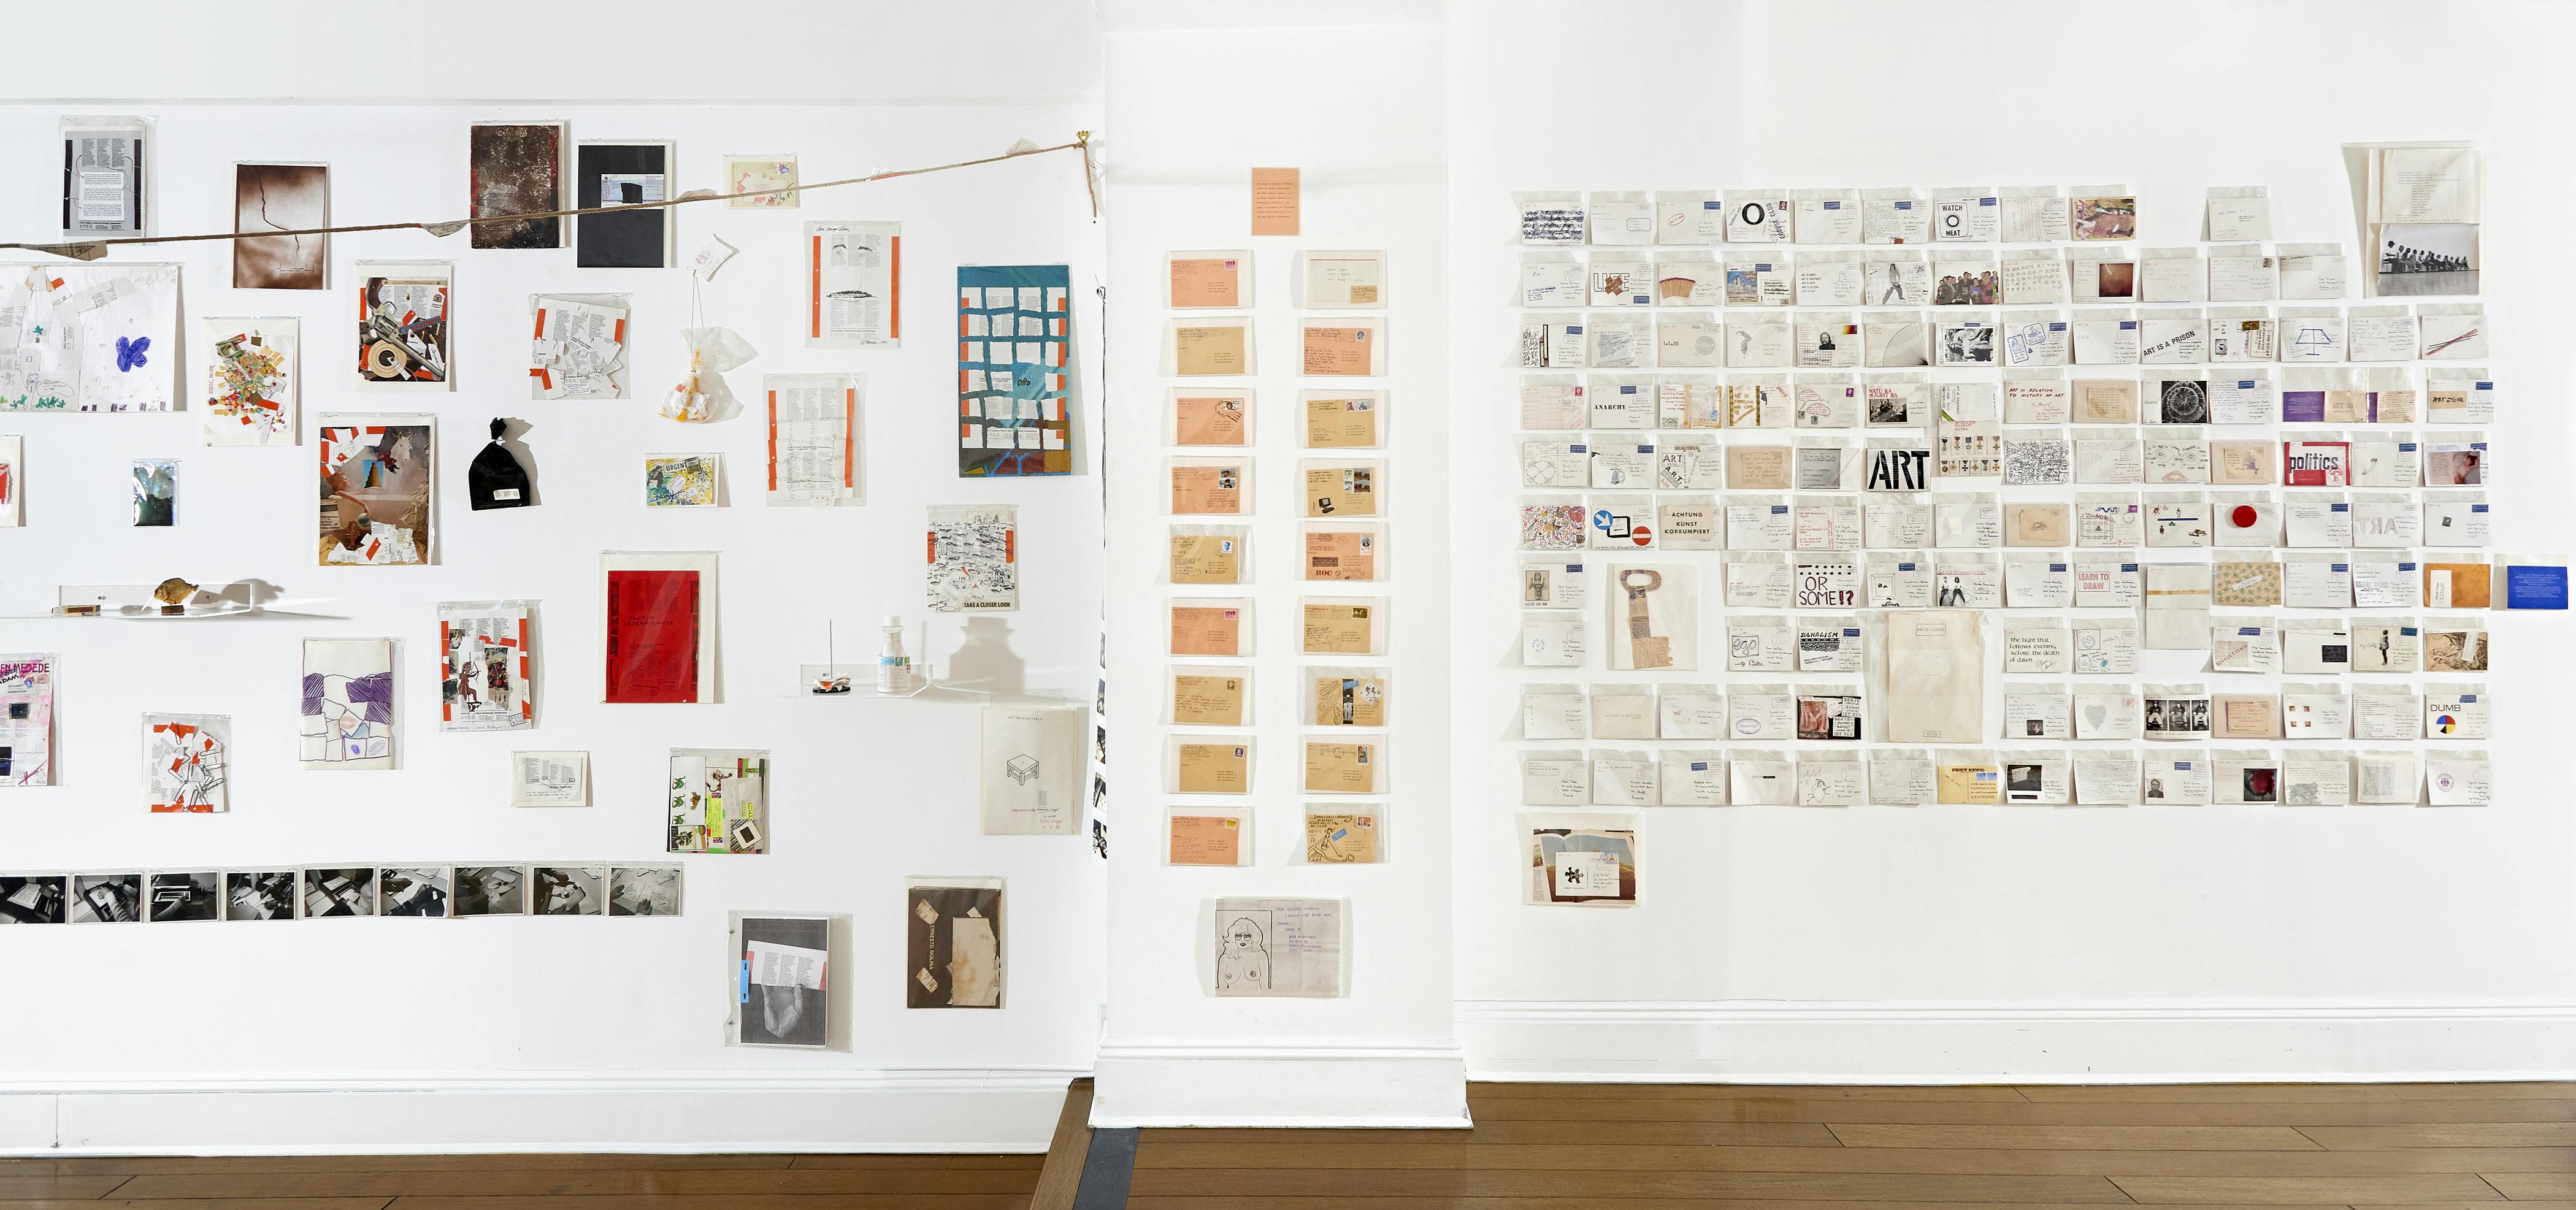 Installation view of Ulises Carrión exhibition showing small collages of varying size, photographs, and sketches mounted to a white wall.